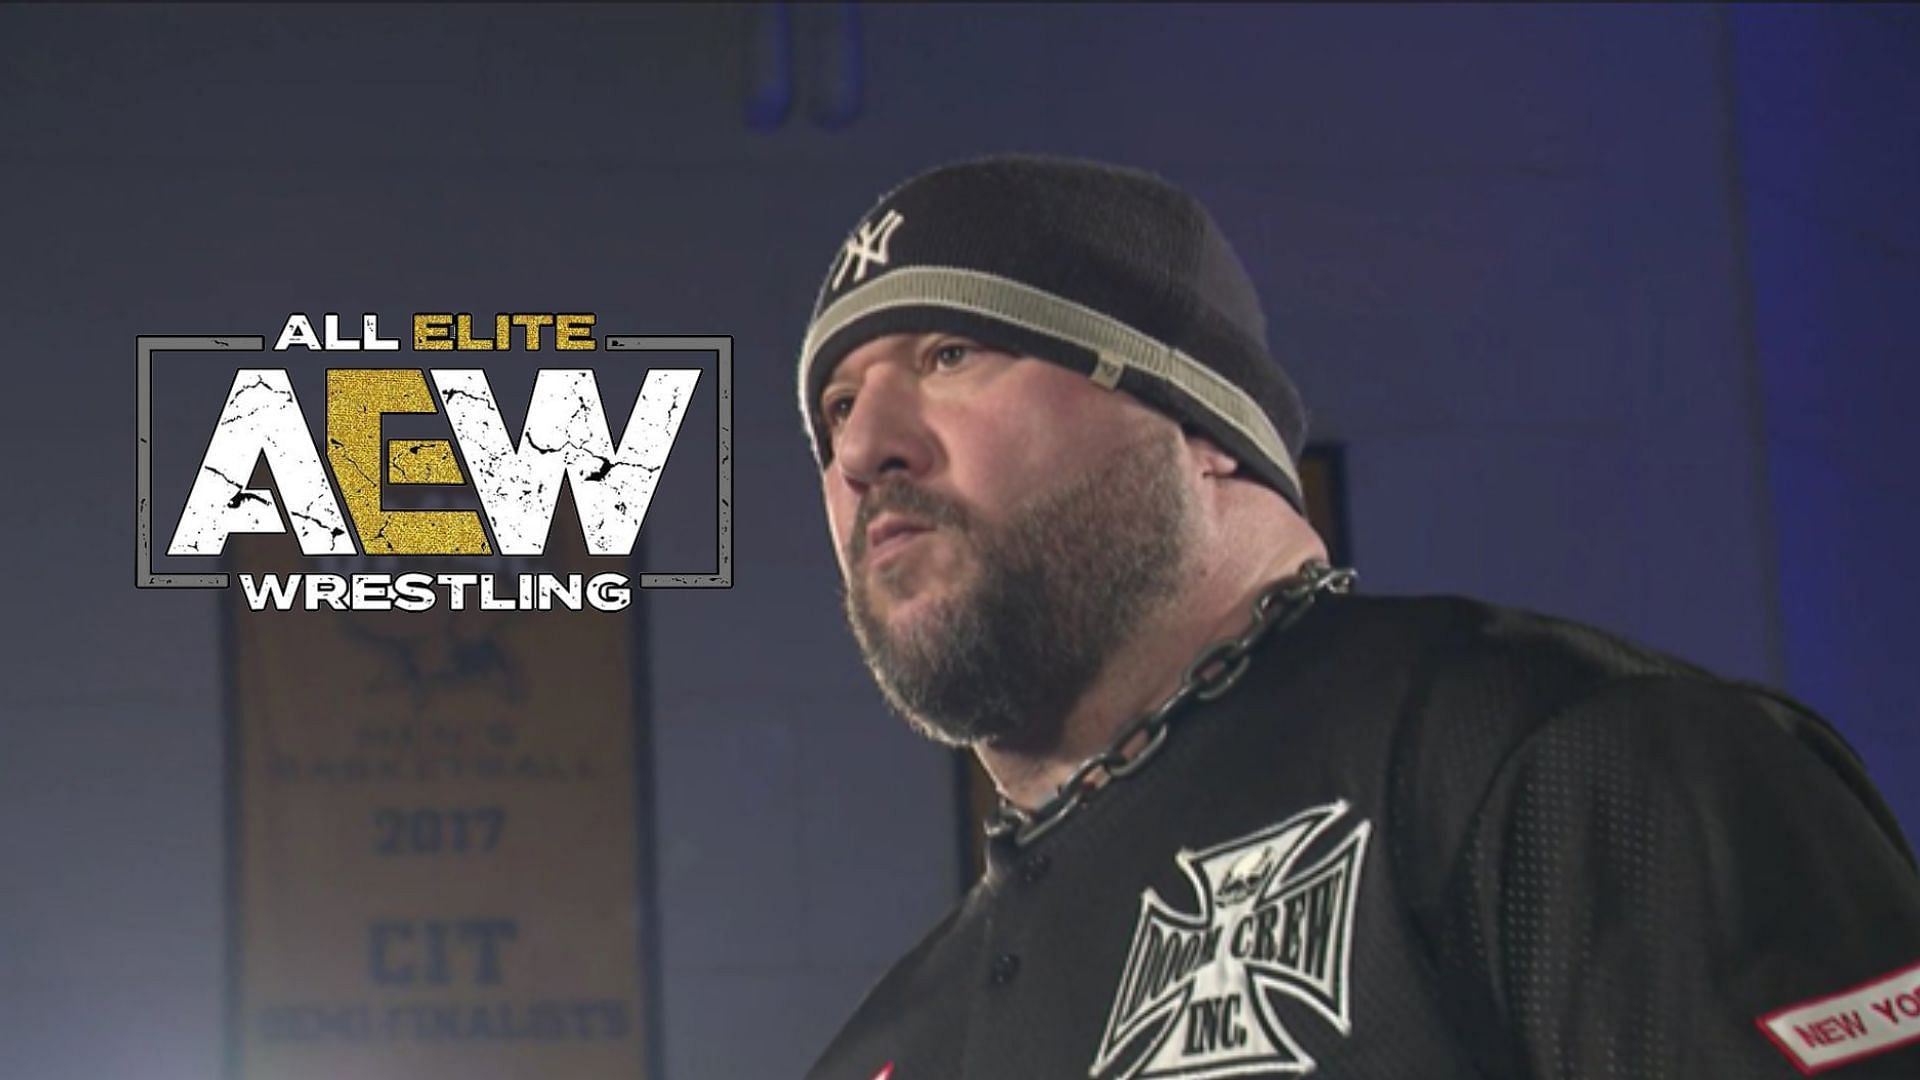 WWE Hall of Famer Bully Ray made a review of a certain AEW Dynamite segment.